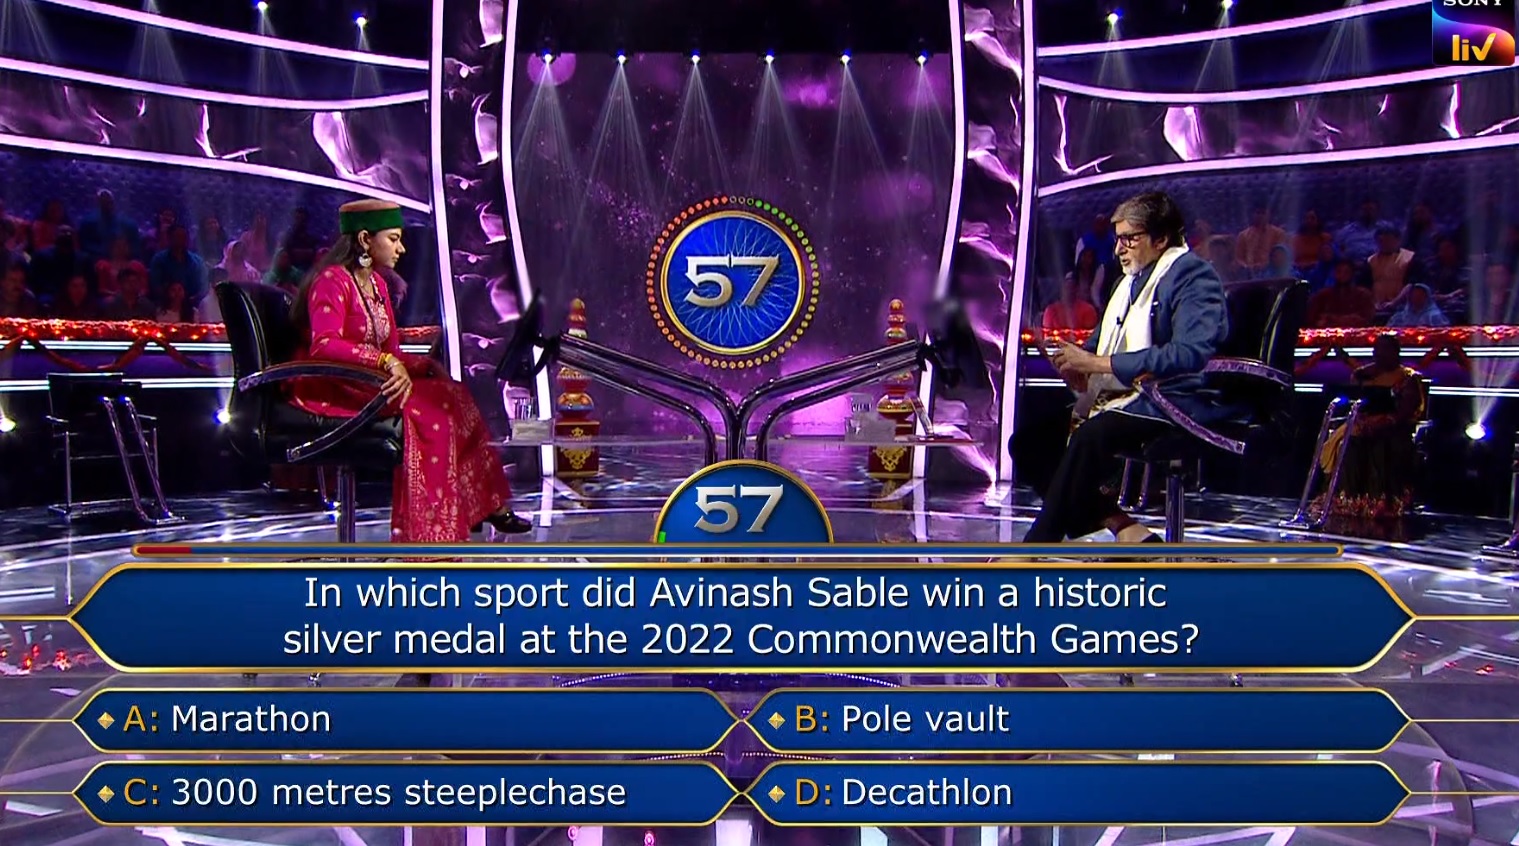 Ques : In which sport did Avinash Sable win a historic silver medal at the 2022 Commonwealth Games?